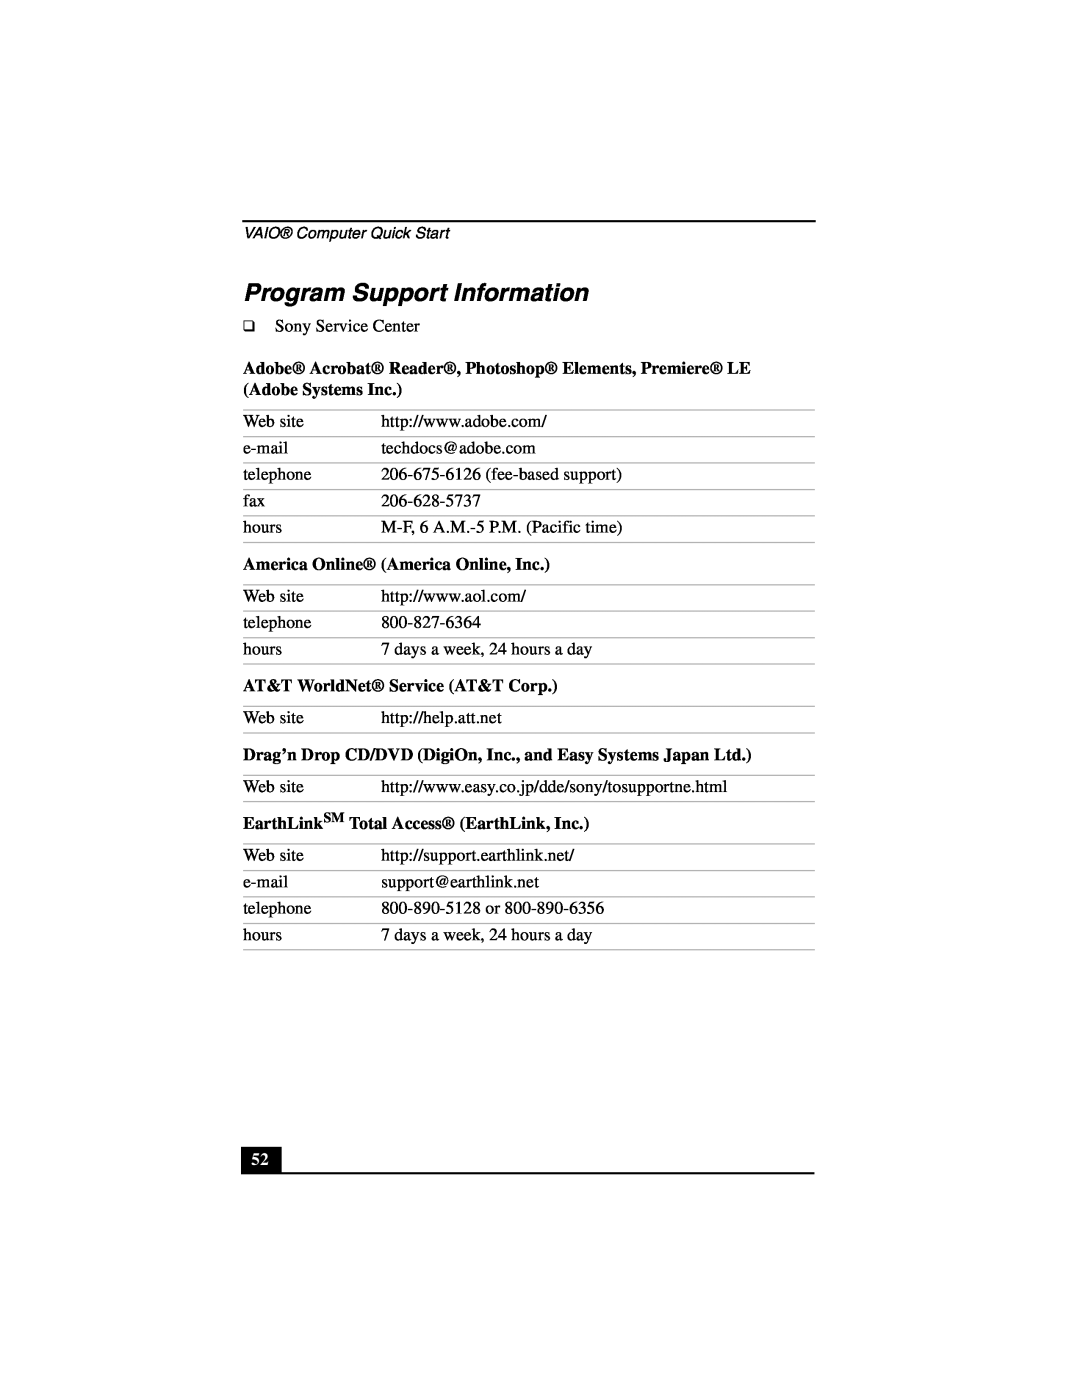 Sony PCG-NV200 quick start Program Support Information, America Online America Online, Inc, AT&T WorldNet Service AT&T Corp 